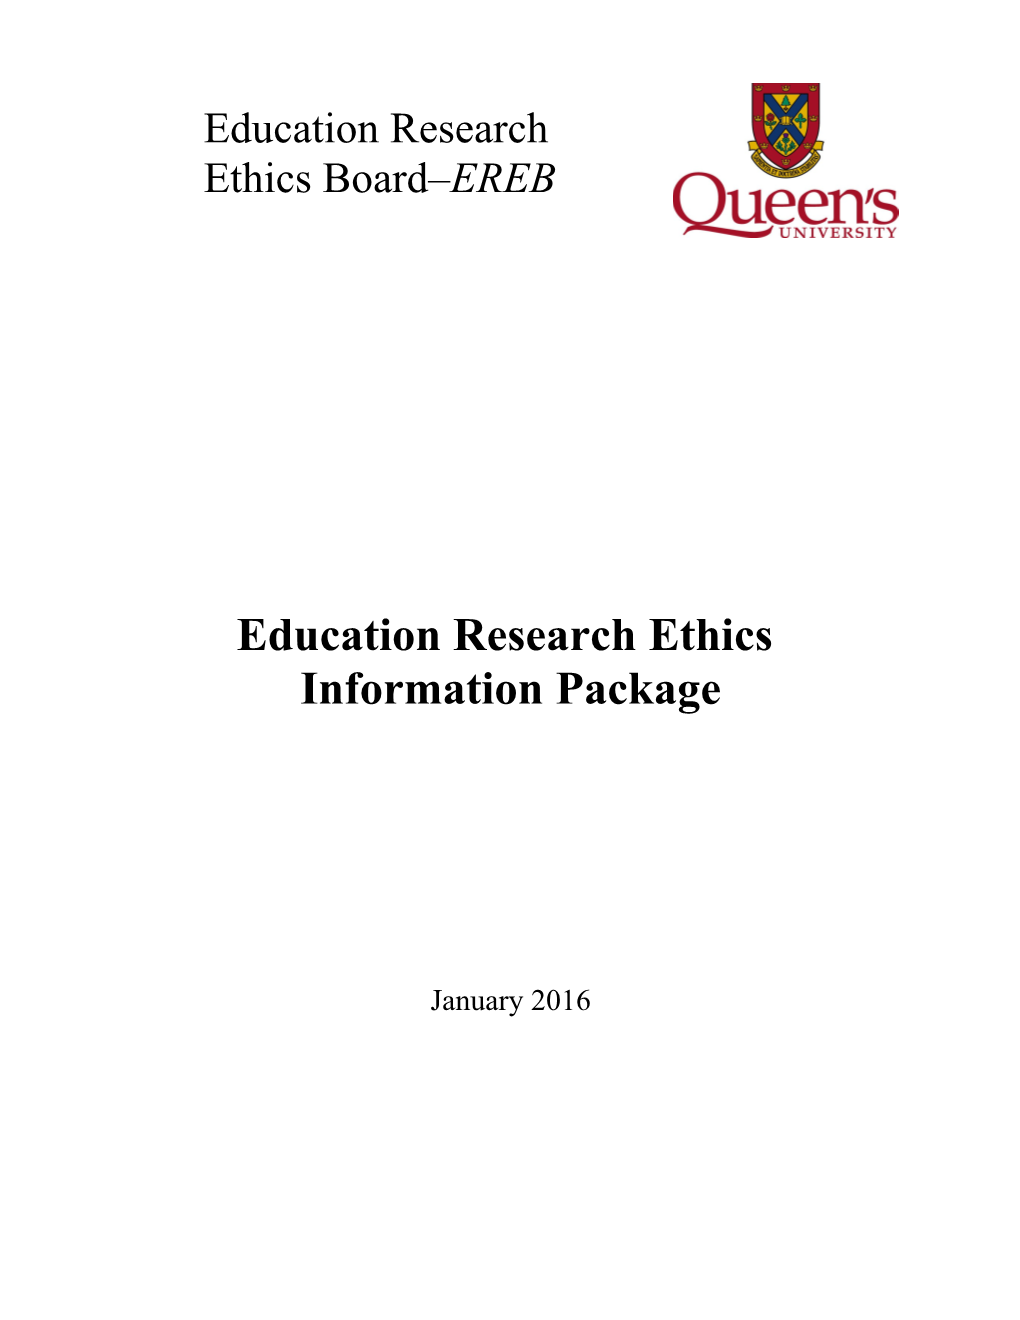 Education Research Ethics